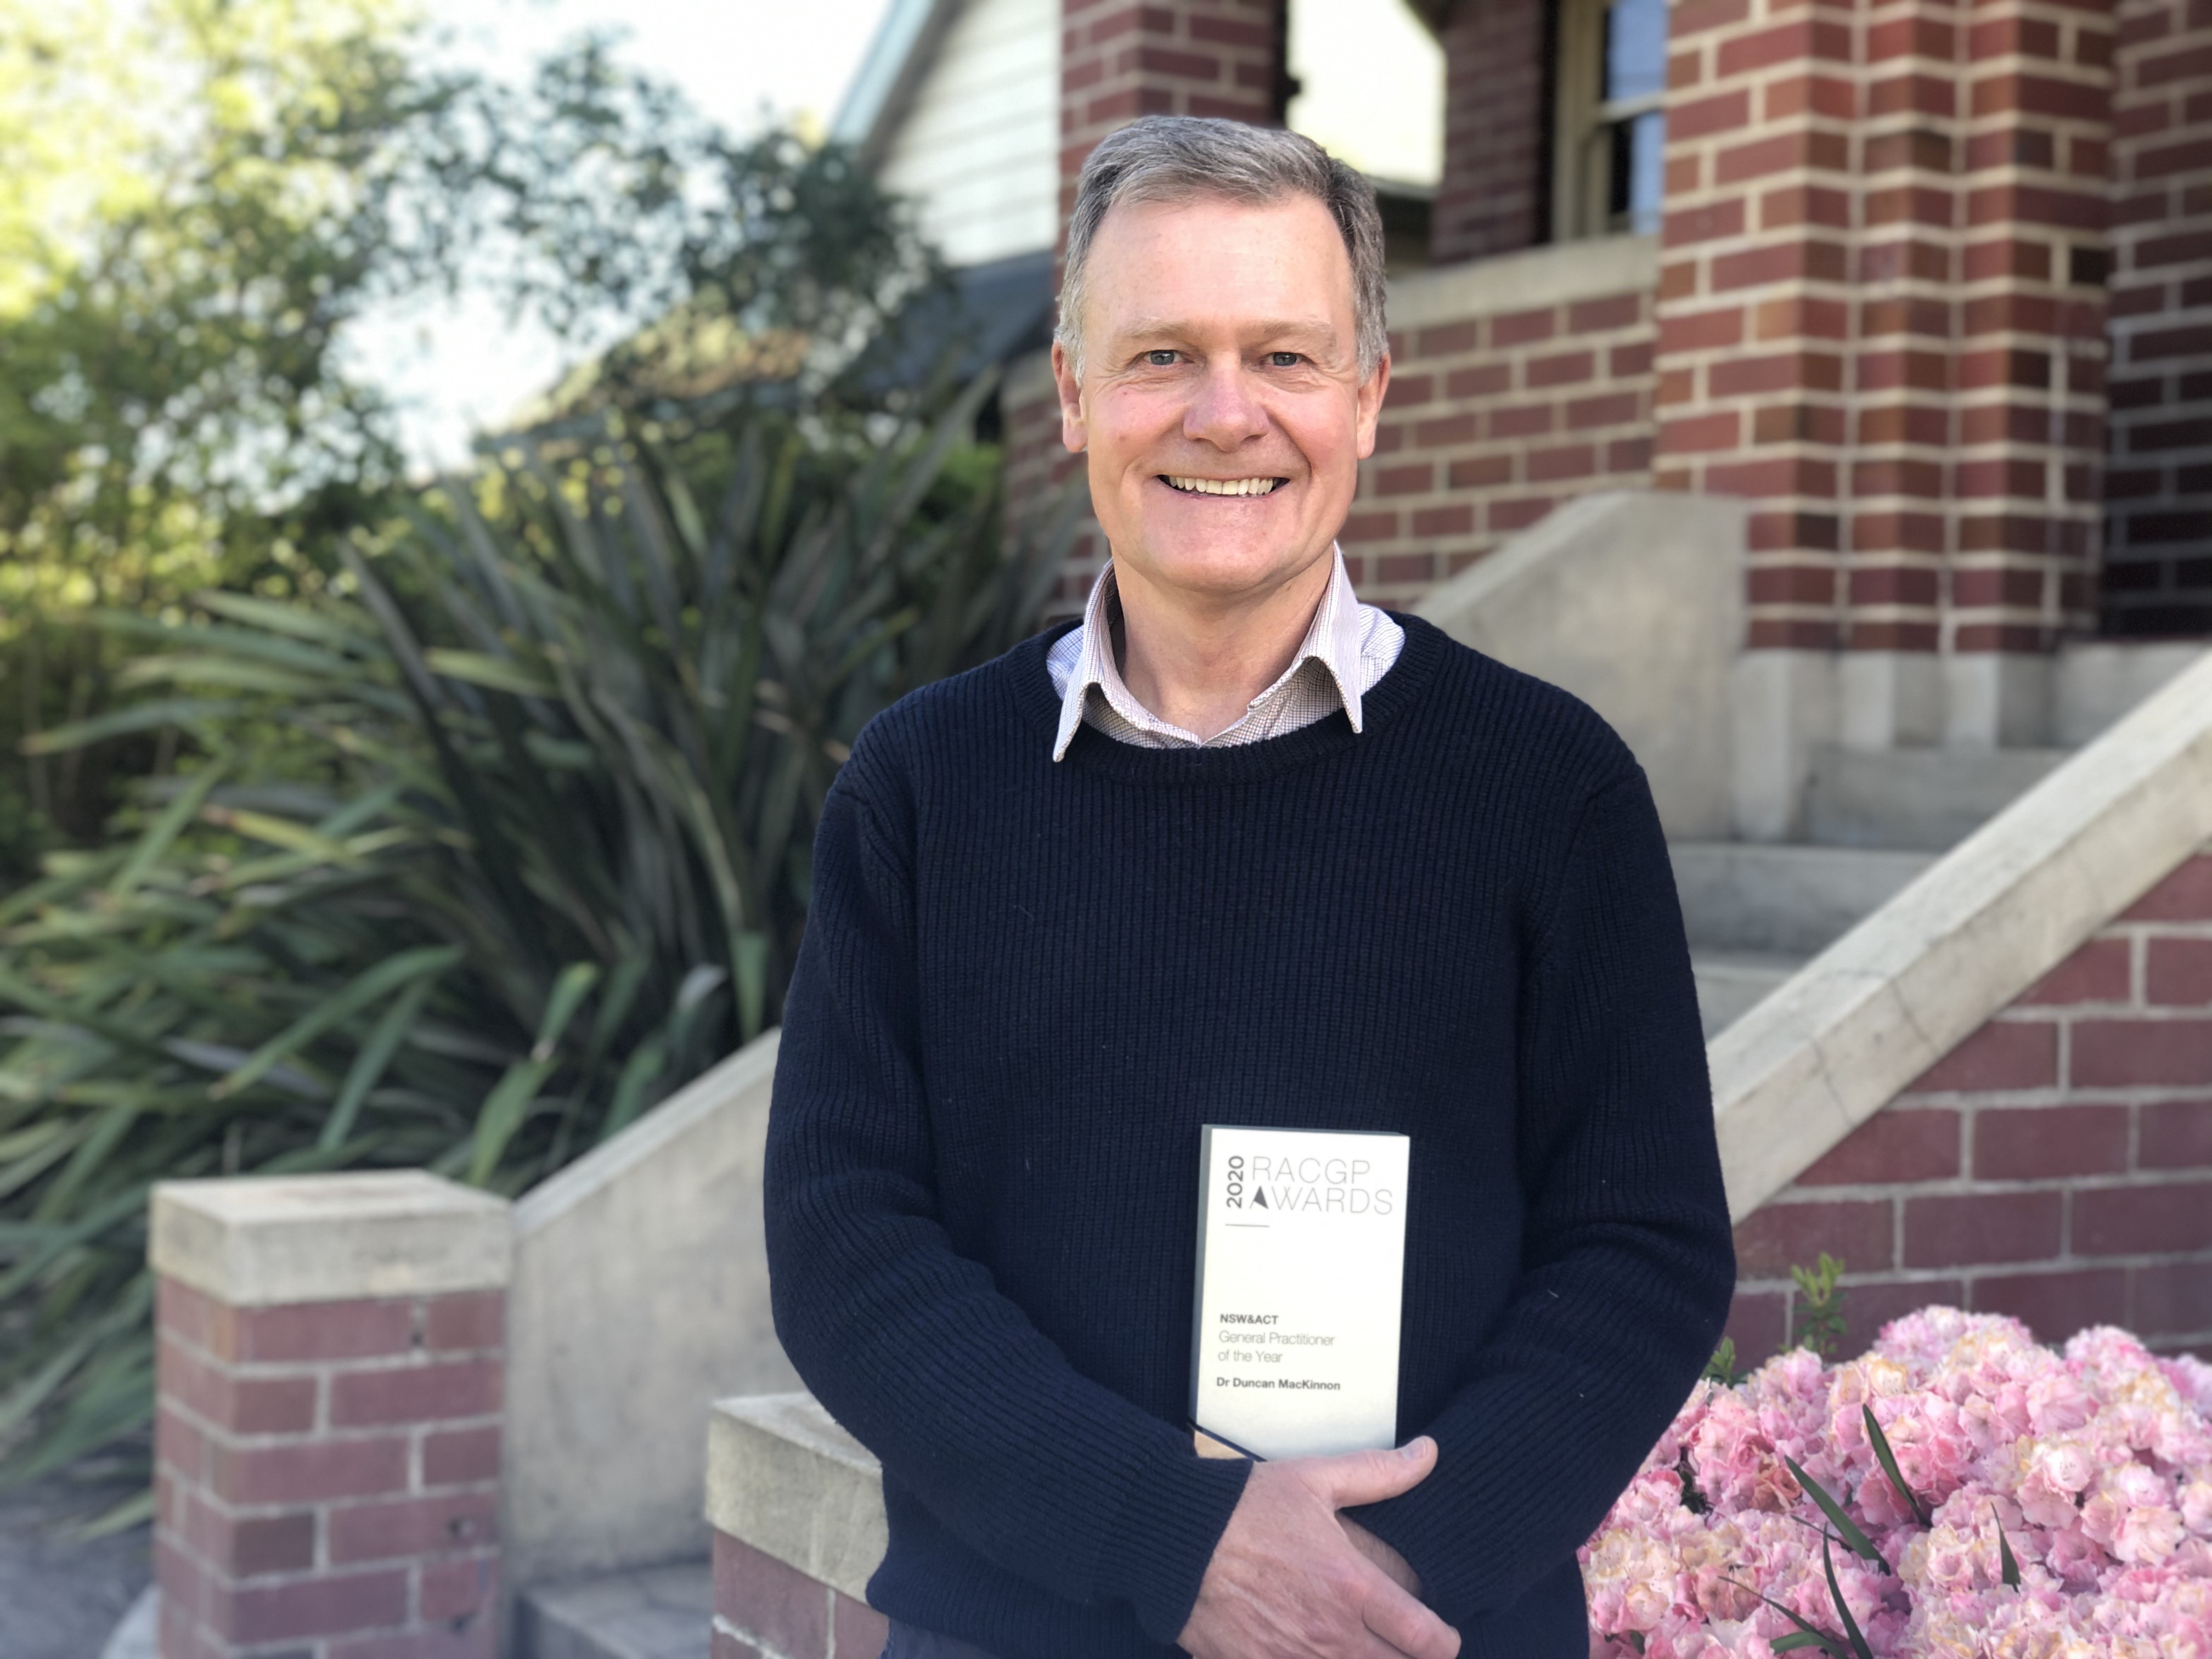 Dr Duncan MacKinnon is RACGP General Practitioner of the Year for 2020